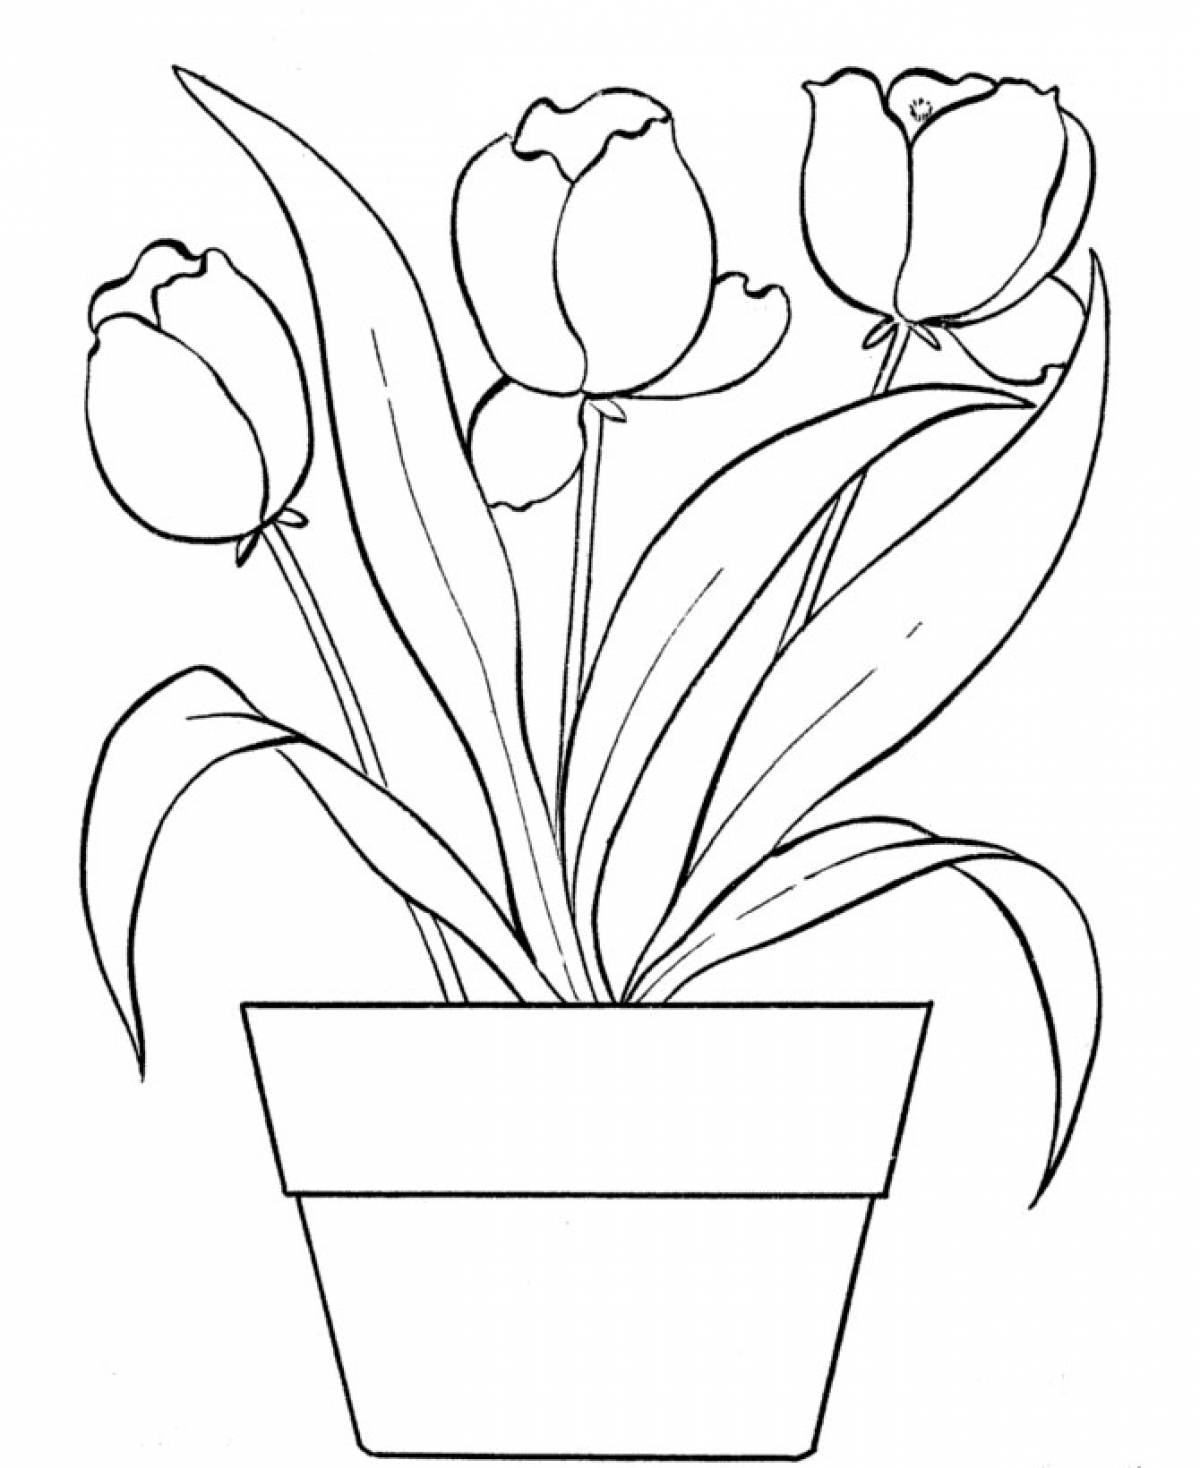 Tulips in a pot